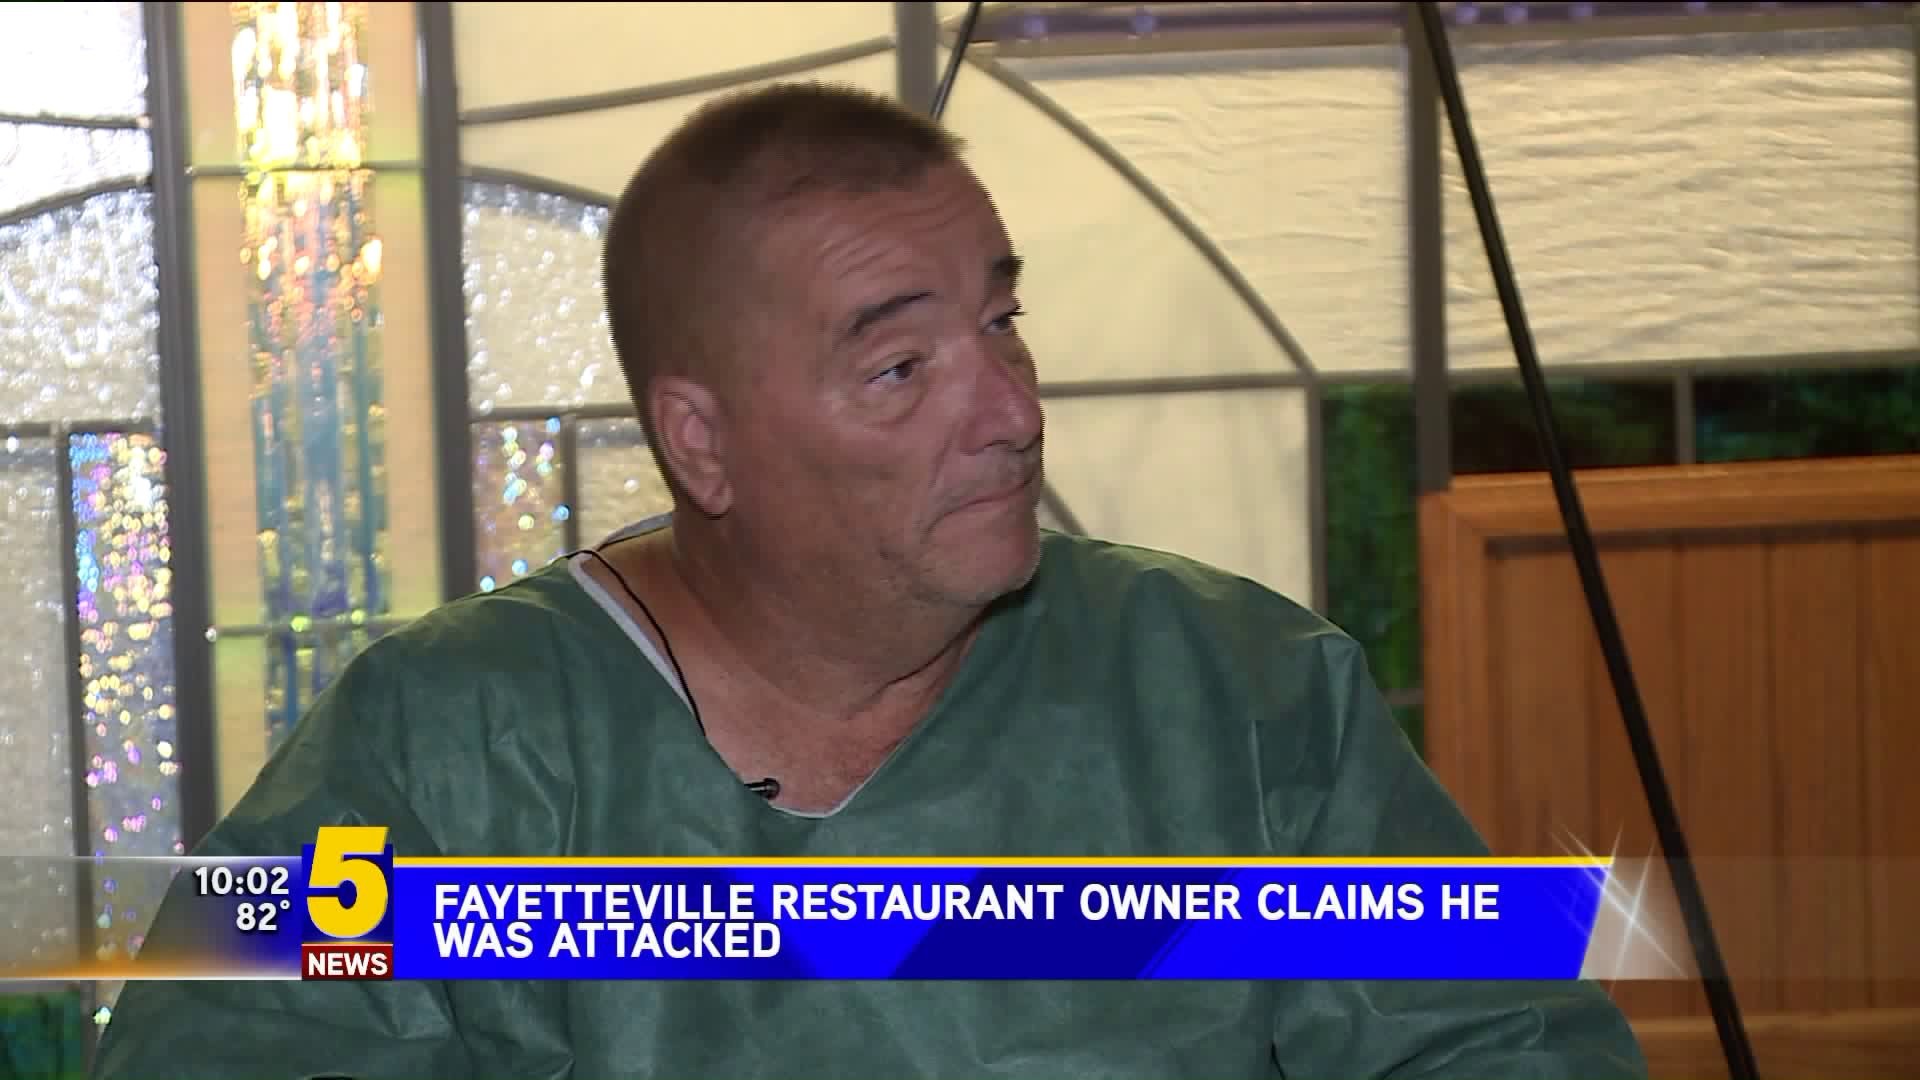 Fayetteville Restaurant Owner Claims He Was Attacked